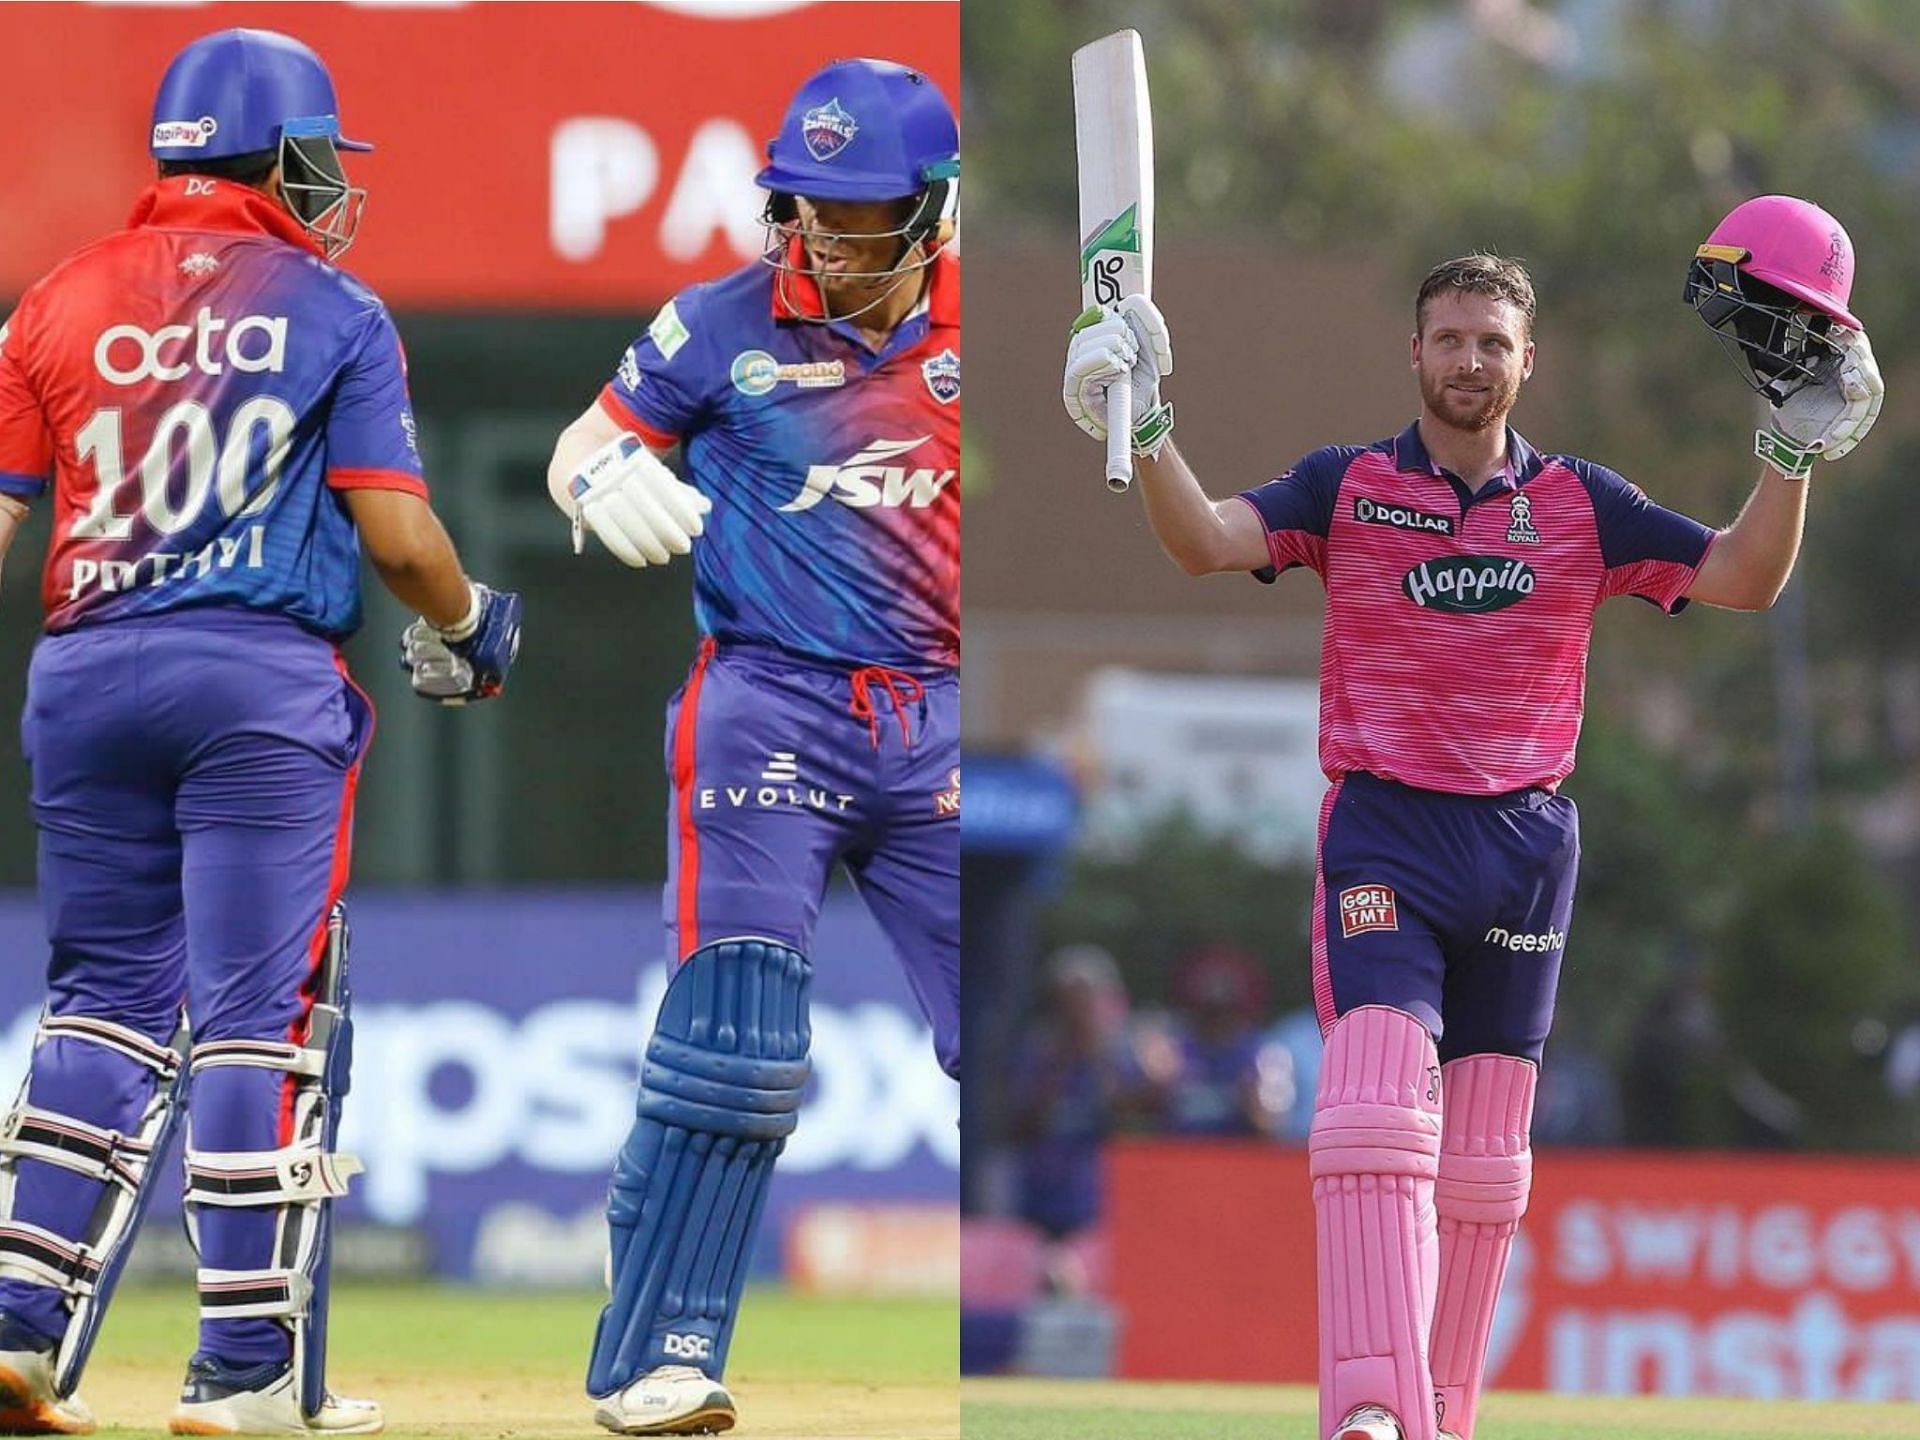 The match 34 of the IPL 2022 will be played between Delhi Capitals and Rajasthan Royals